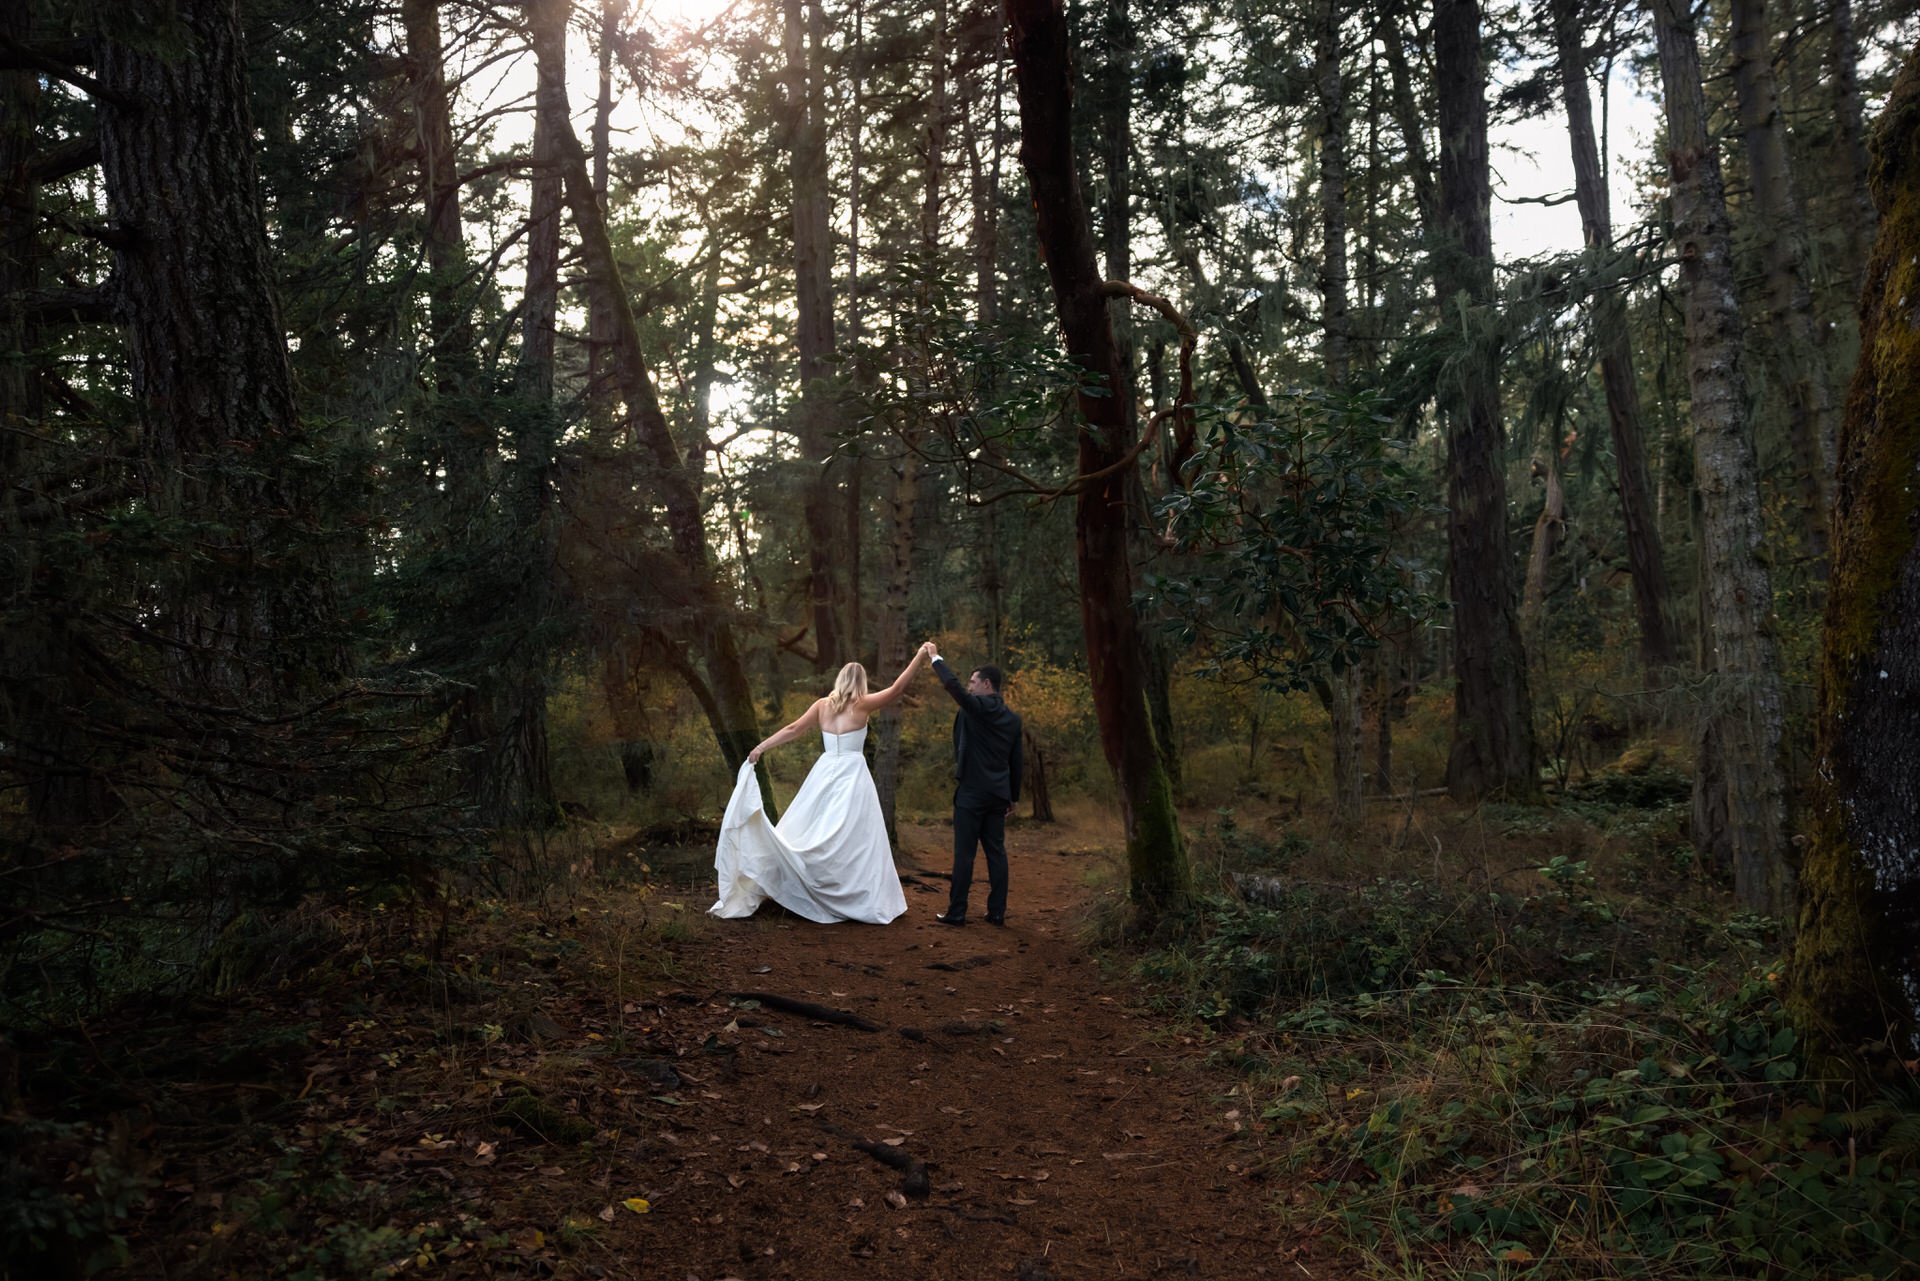 Vancouver Island Adventure Elopement and Small Wedding Photographer - Allie Knull's Photography-53.jpg